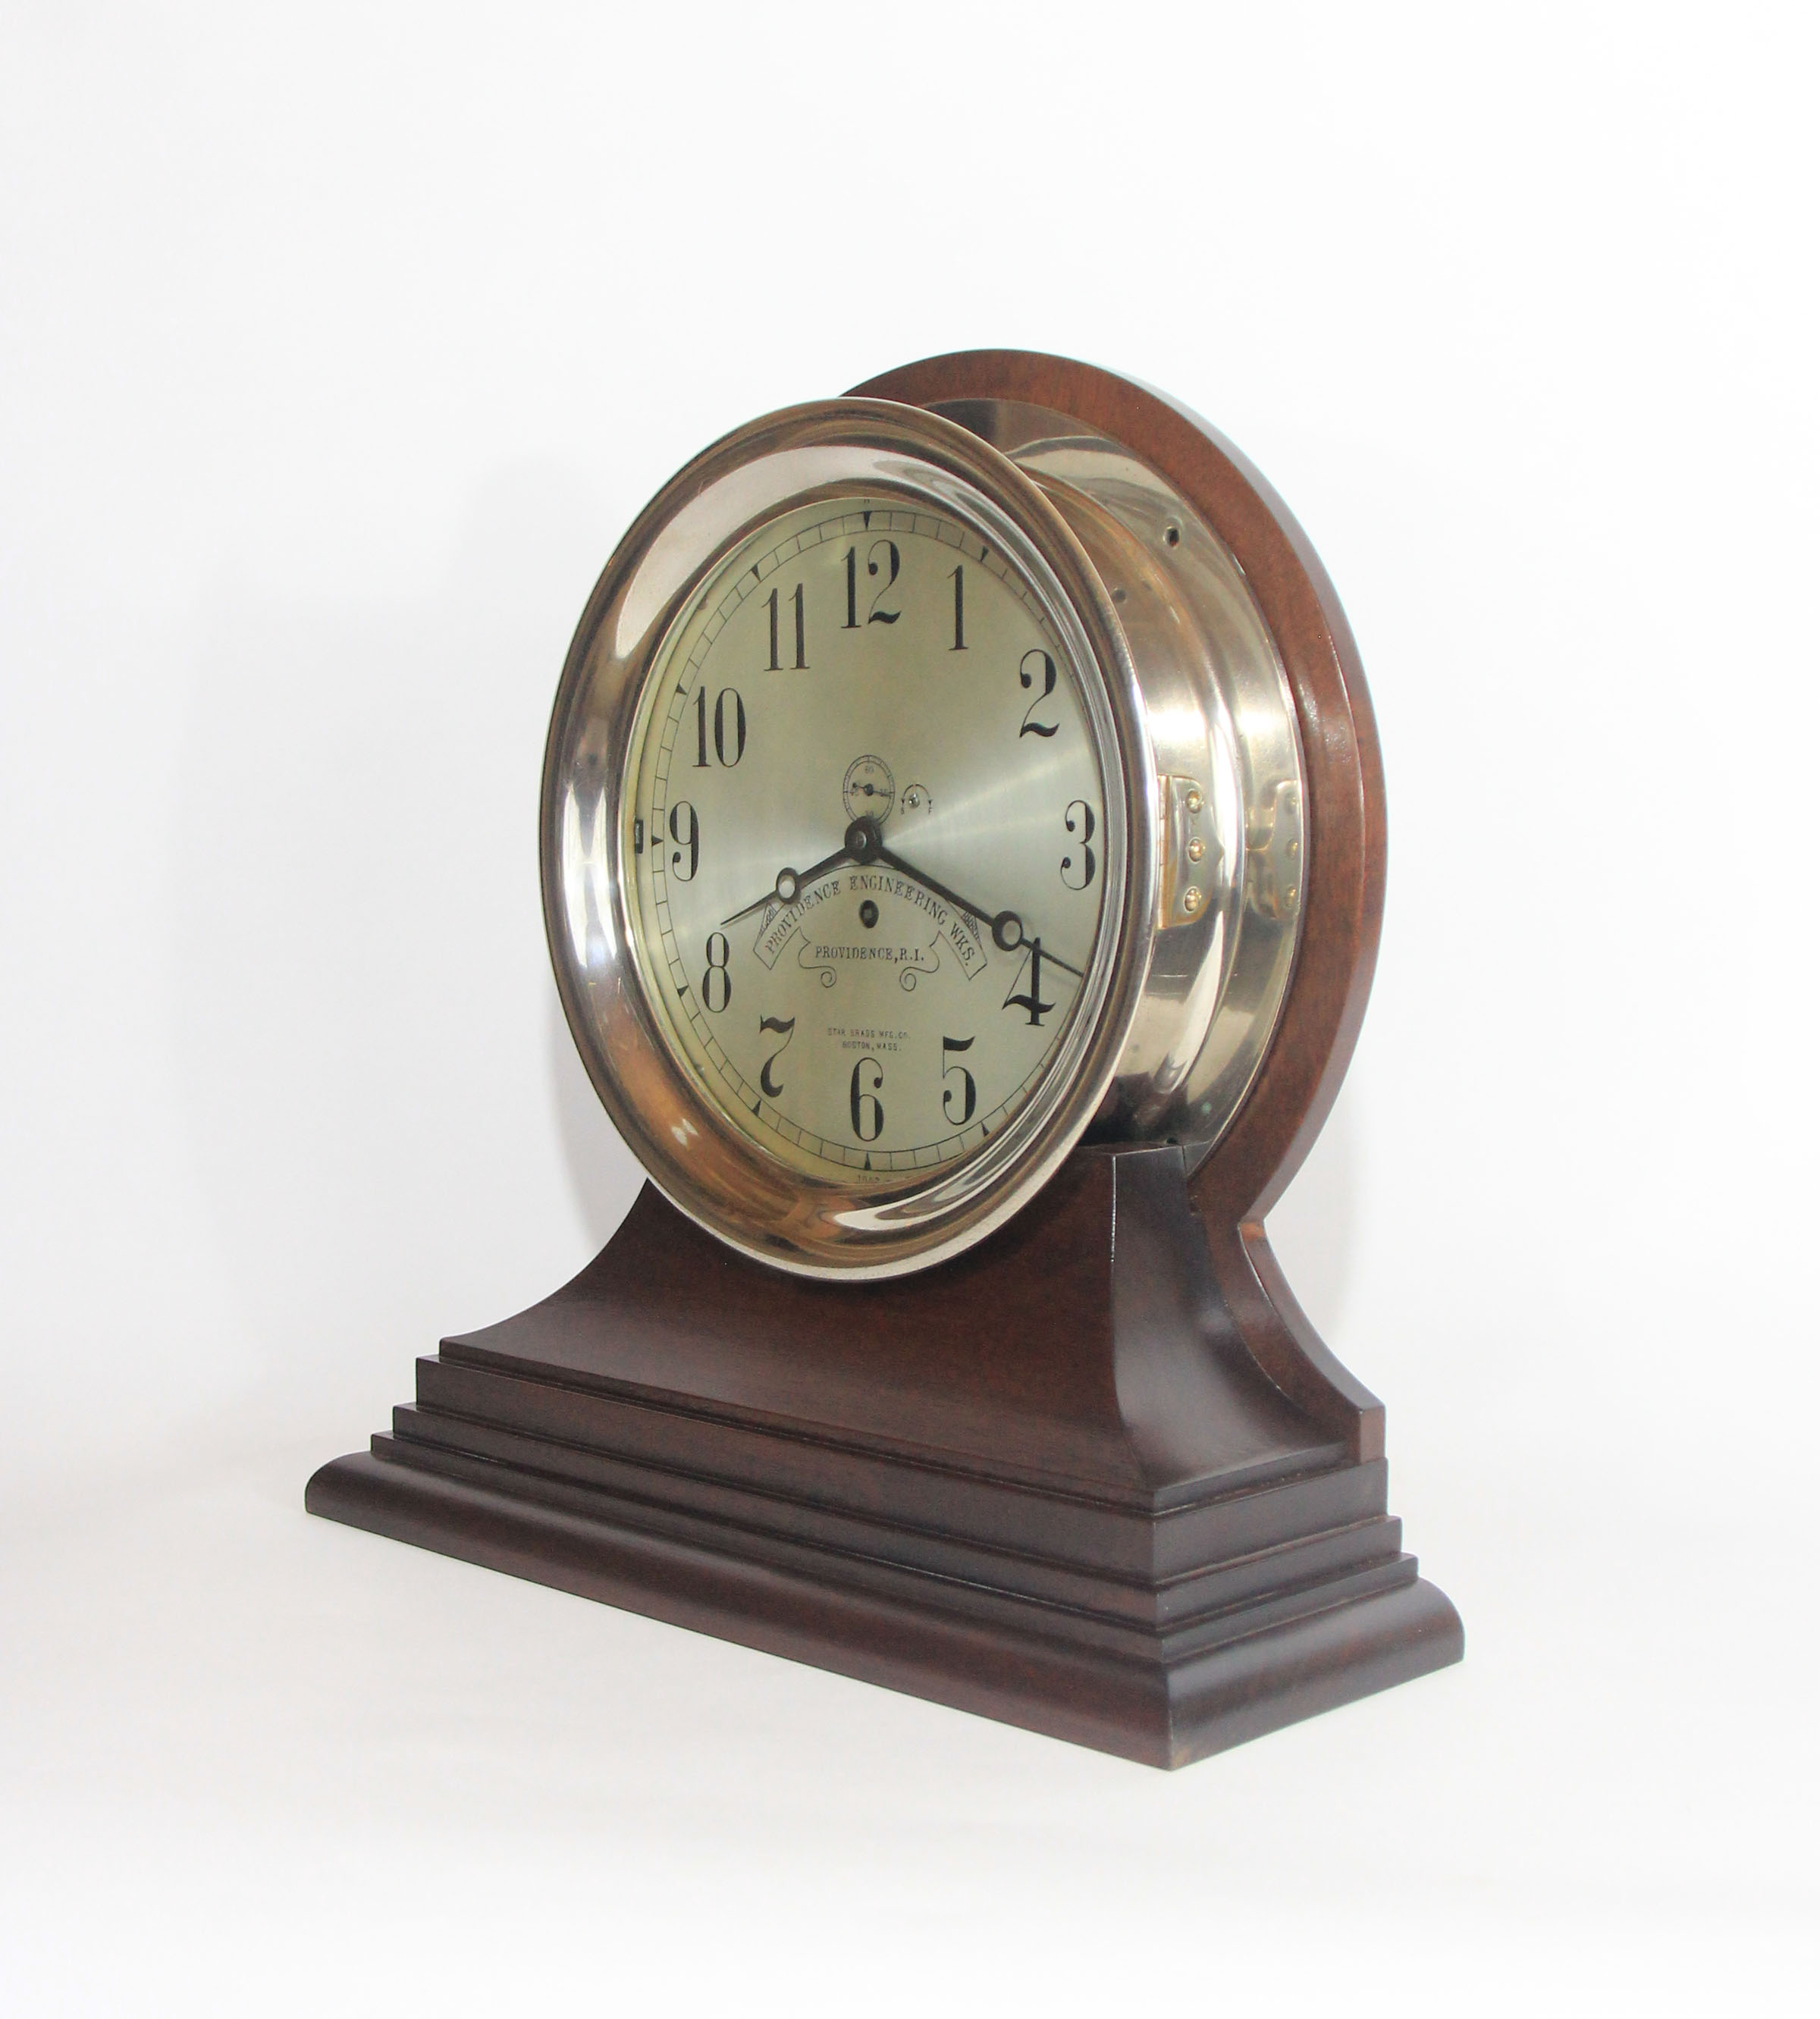 Chelsea 10 inch Marine Clock for Providence Engineering Works